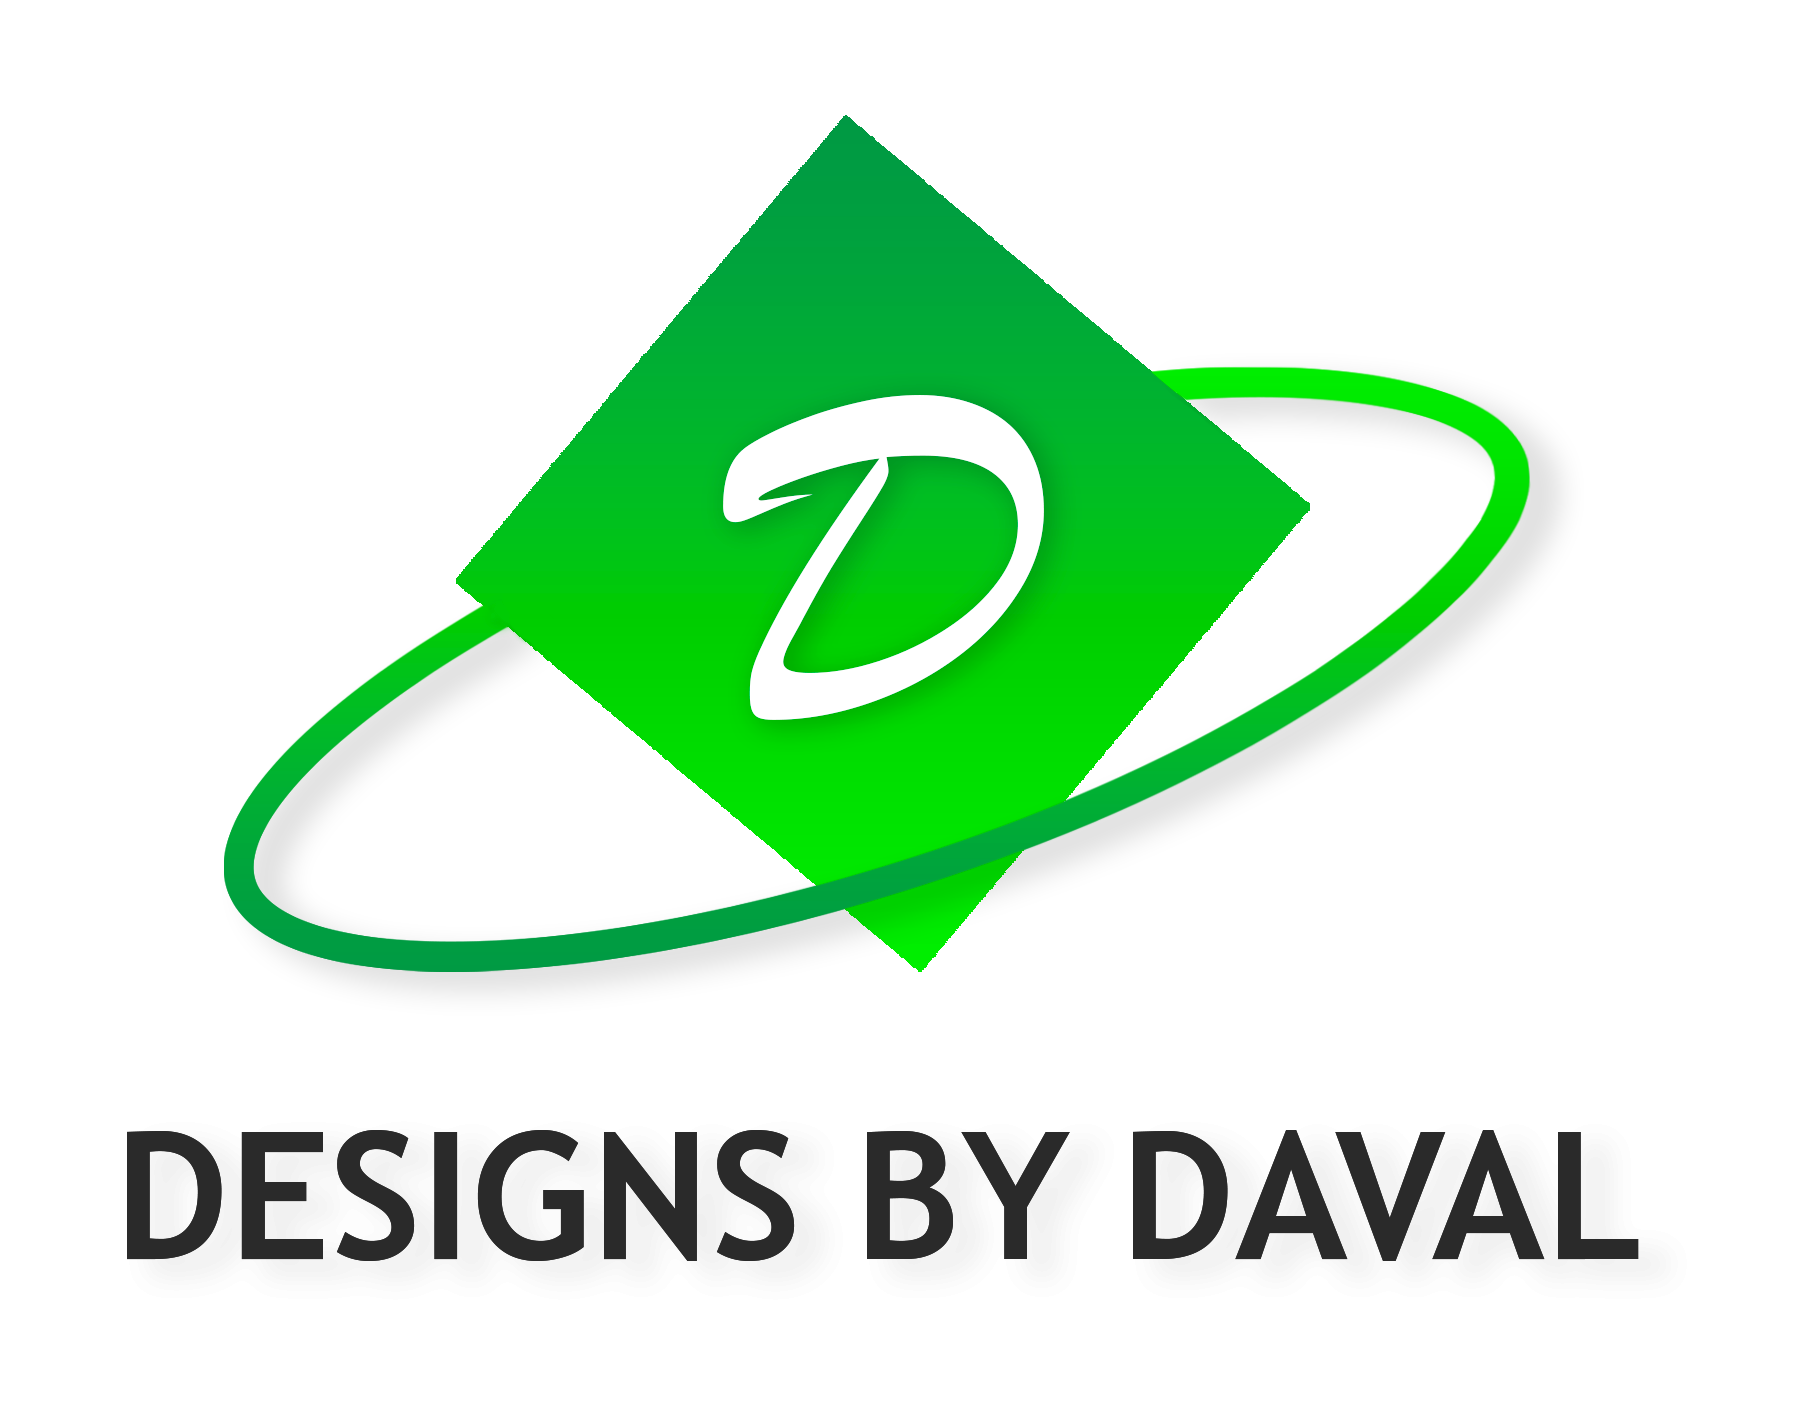 Designs by DaVal